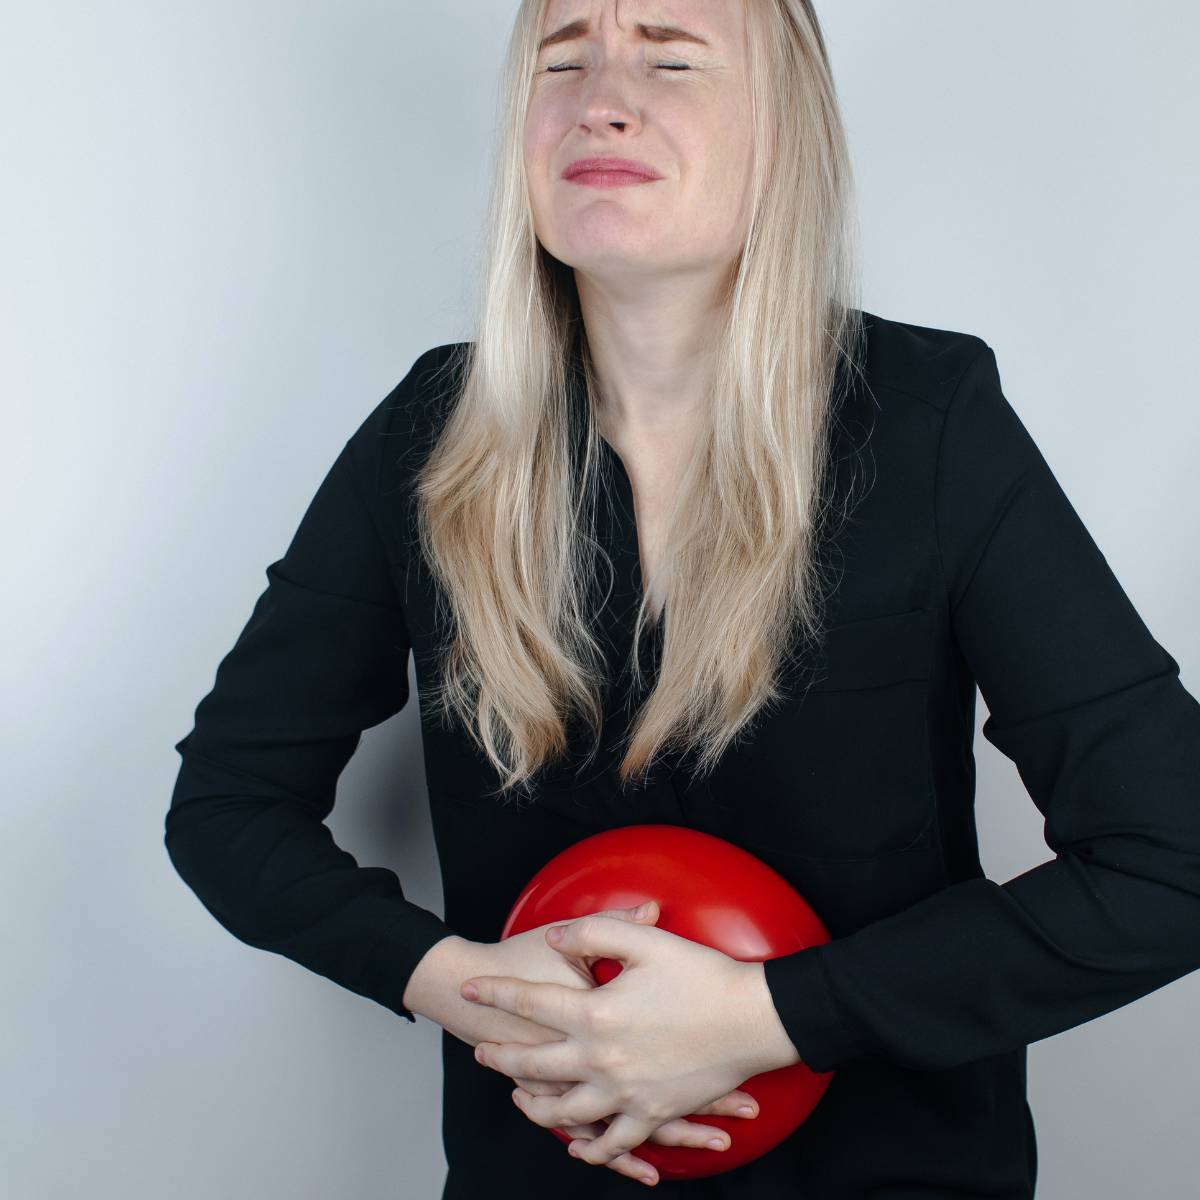 Woman wearing black cloth and holding a red balloon having a gassy tummy